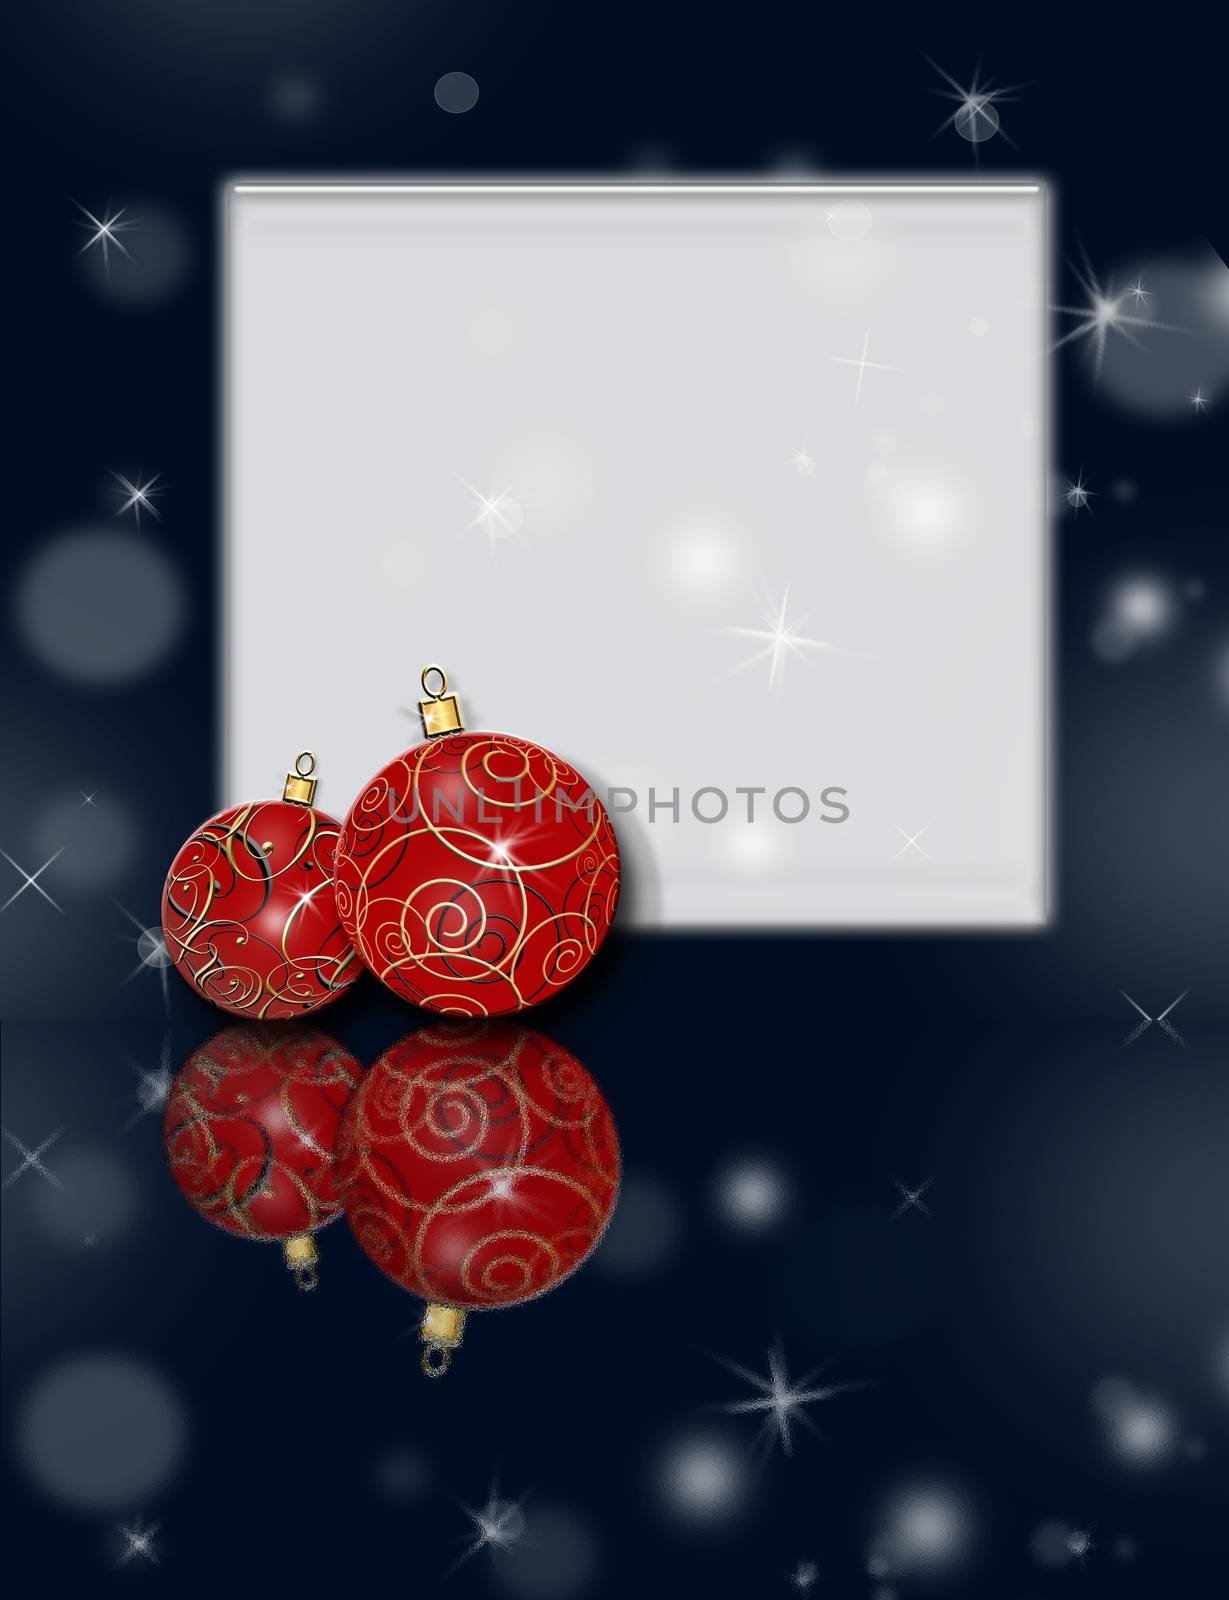 Classic Merry Christmas greeting. 2021 New Year card. Luxury holiday balls background for invitation, seasons greeting. place for text. Copy space. 3D illustration